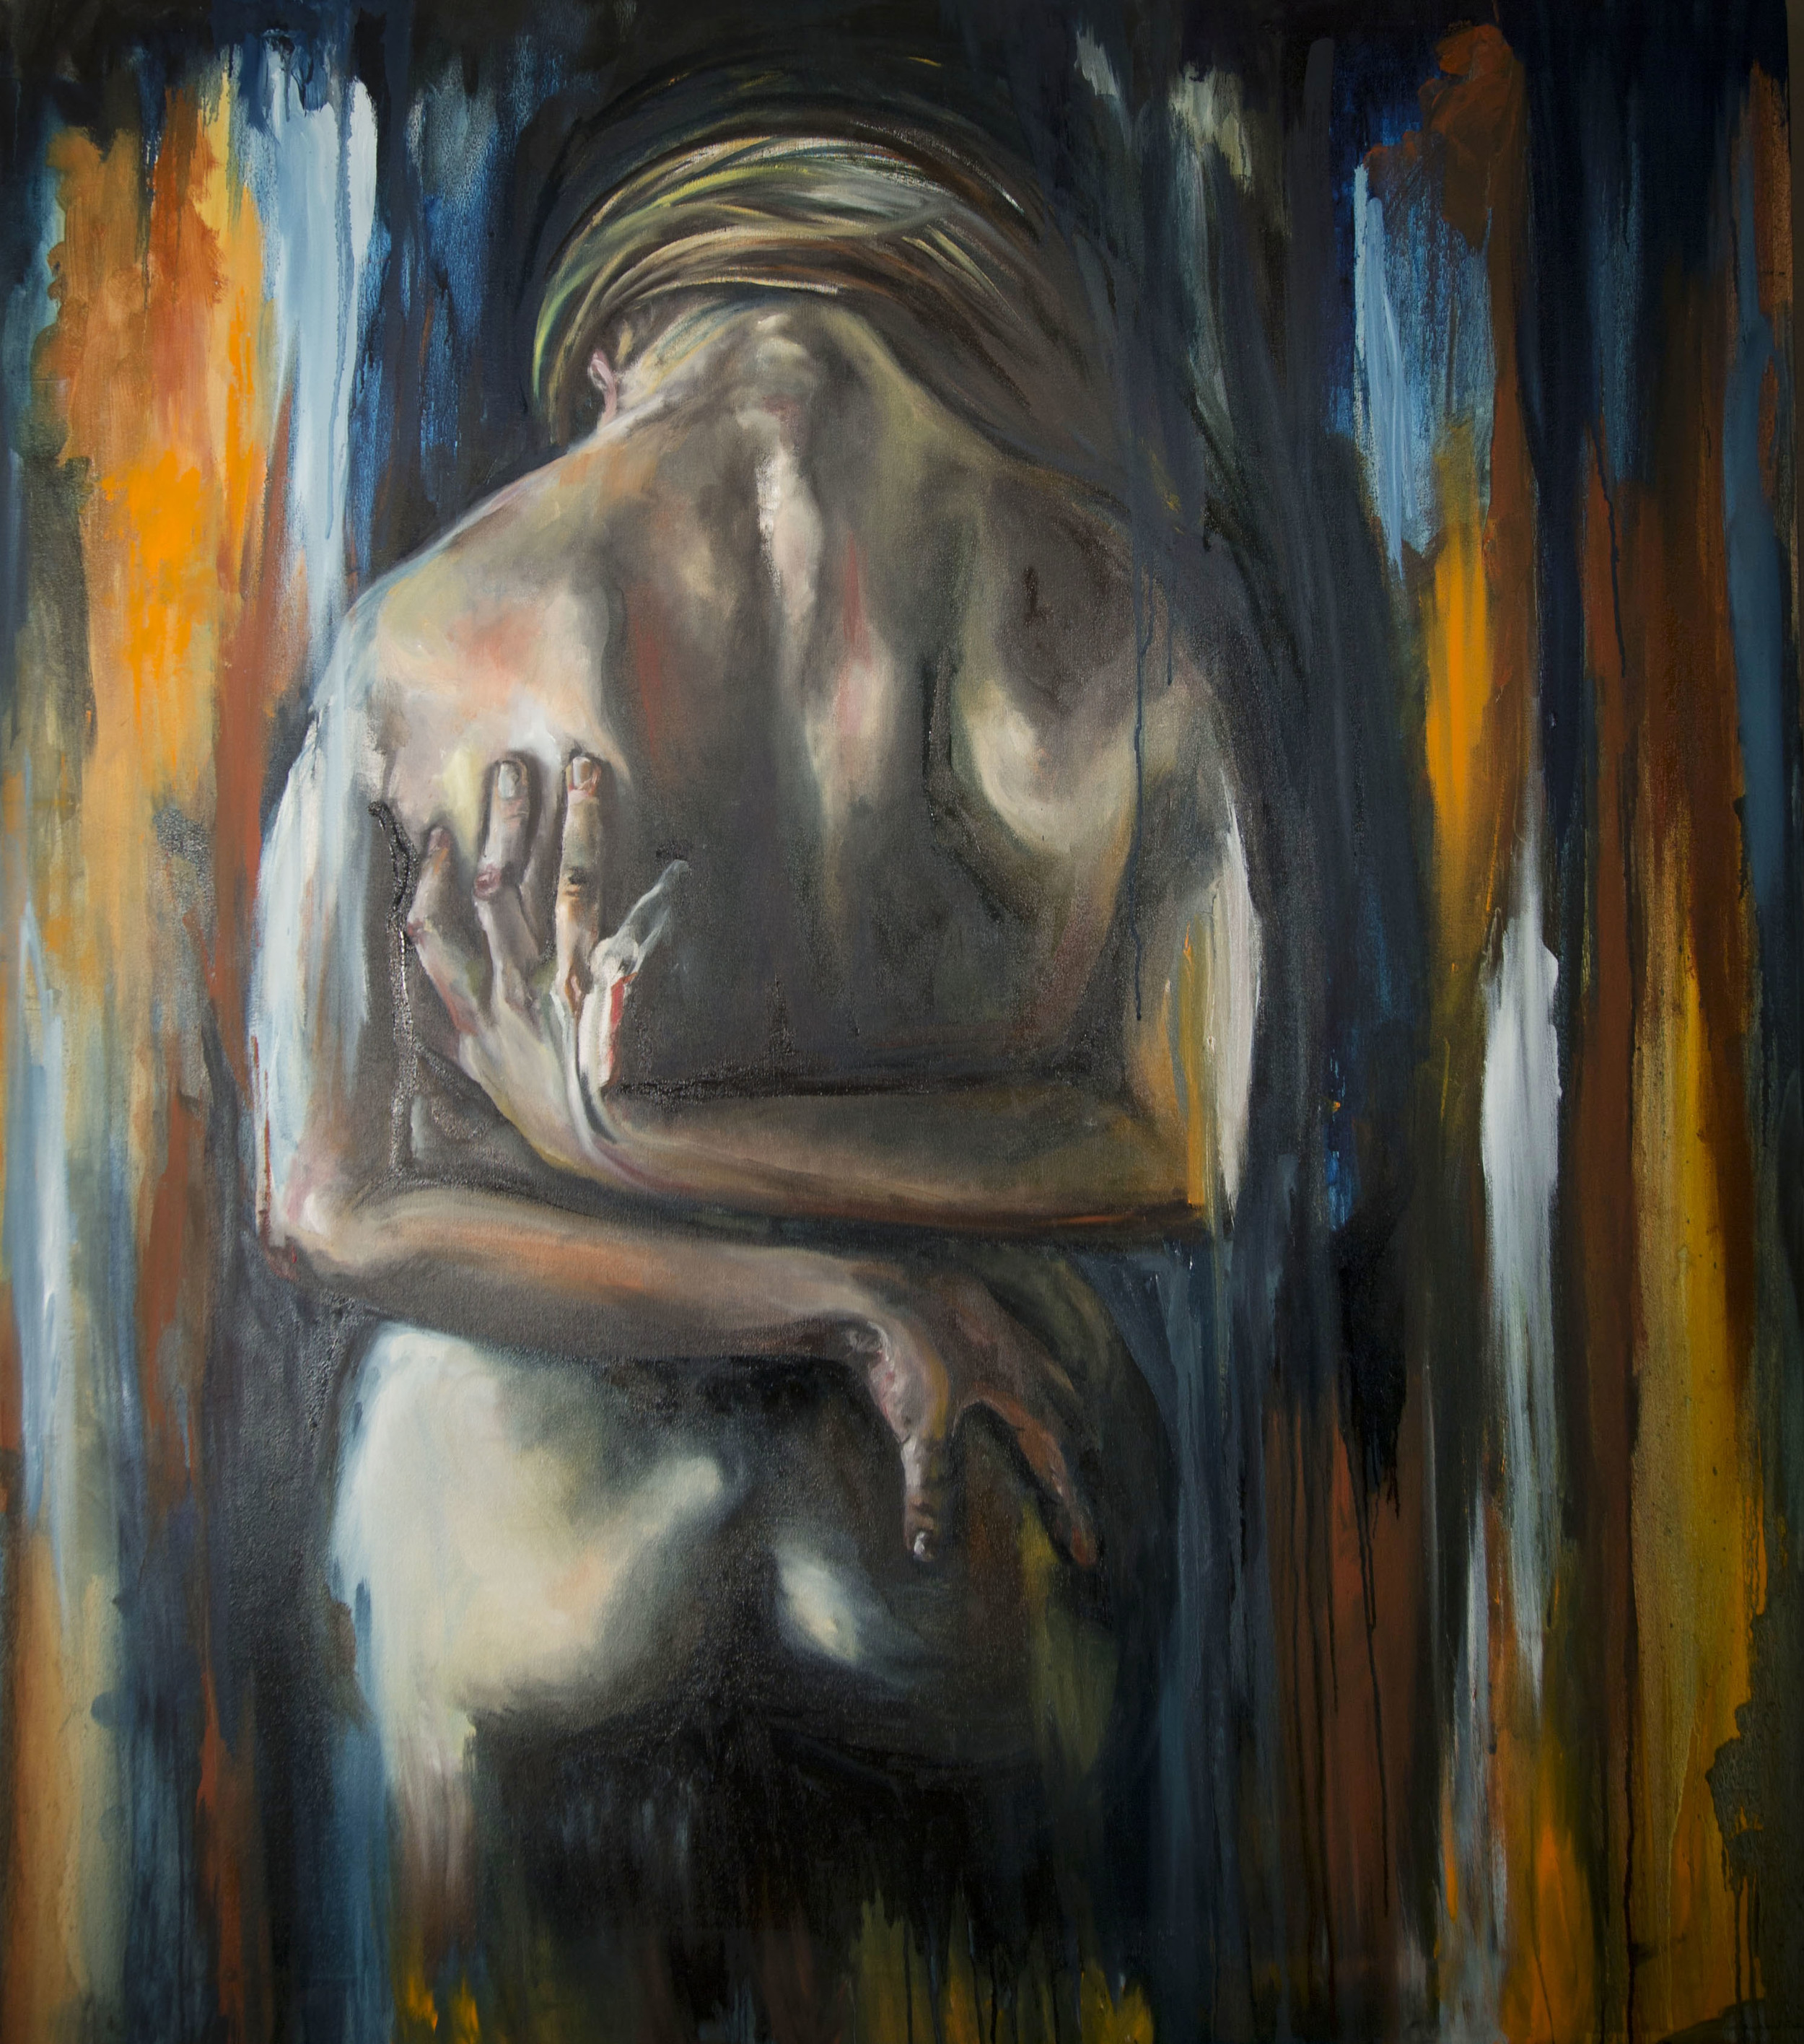   Back II , 2014  56” x 60” | Oil on canvas 